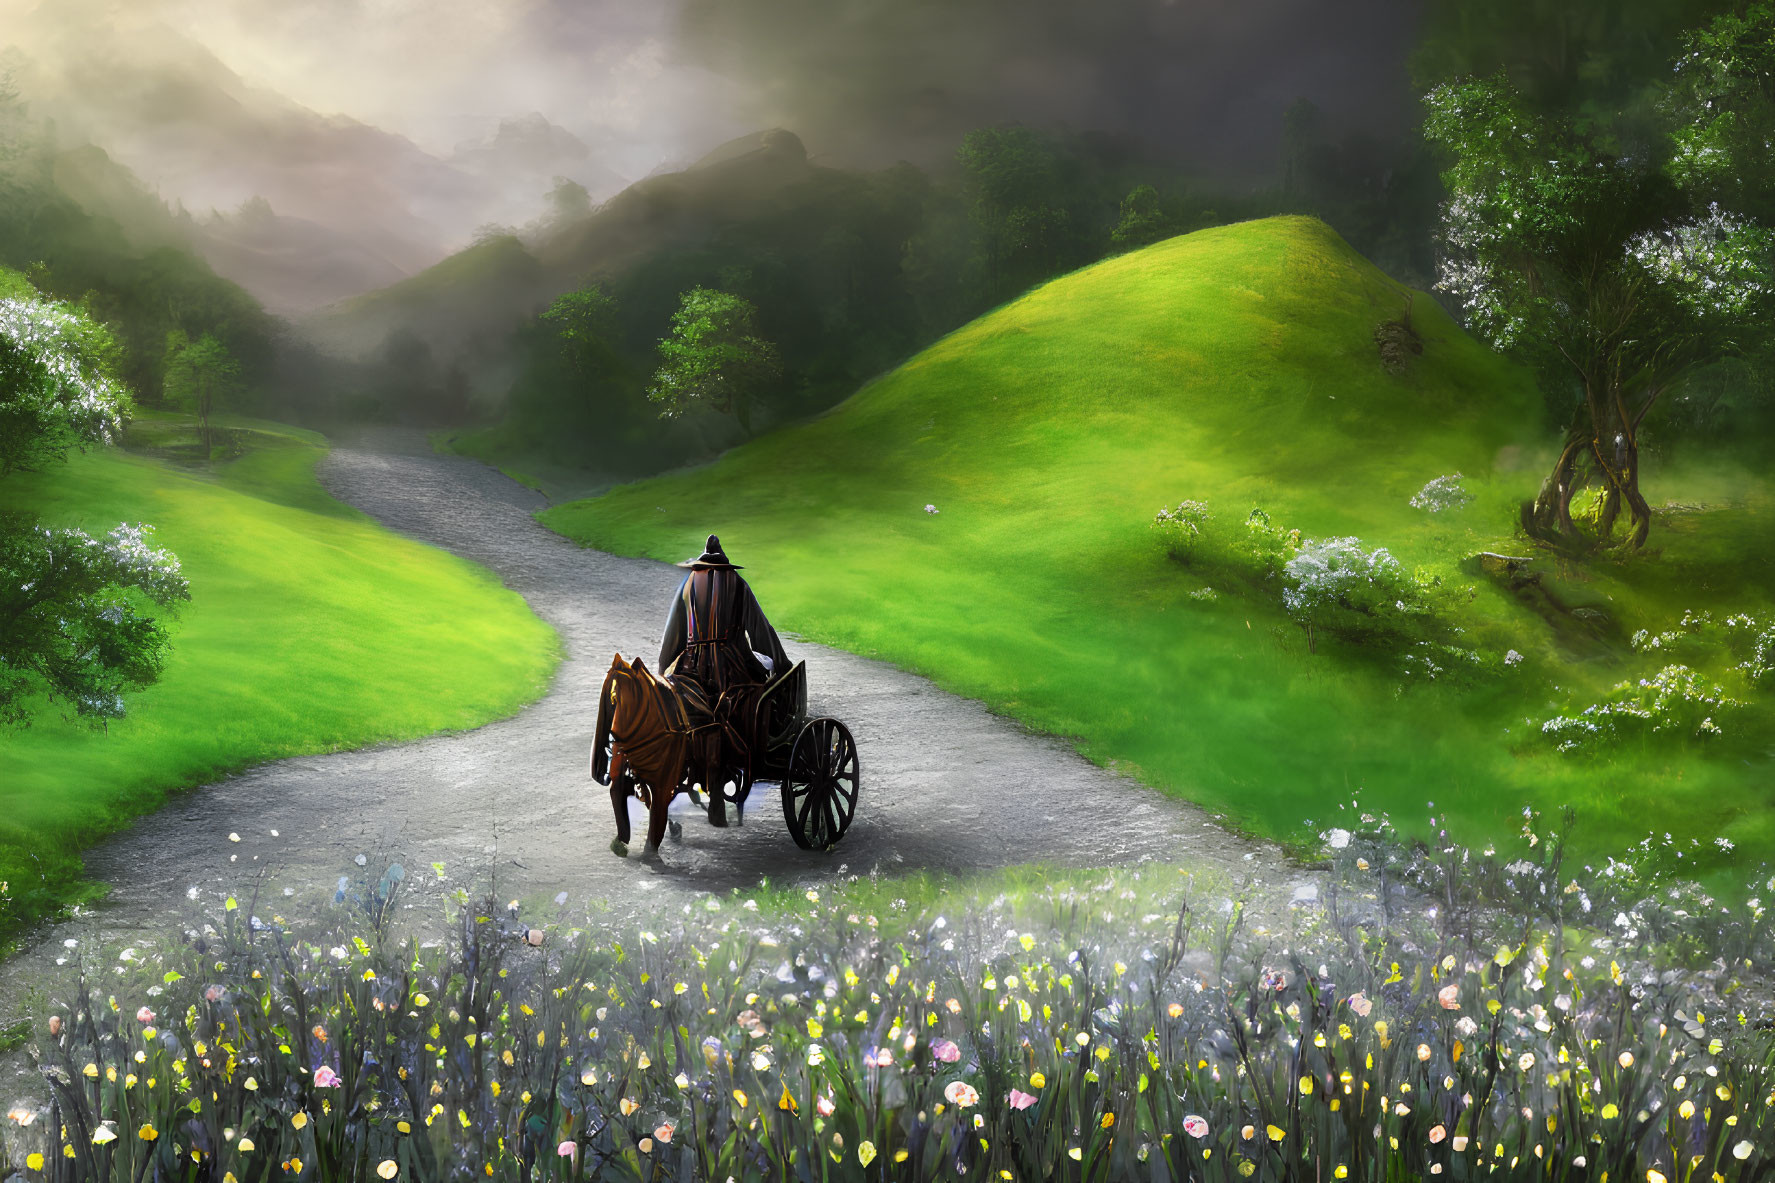 Horse-drawn carriage on split path in lush landscape